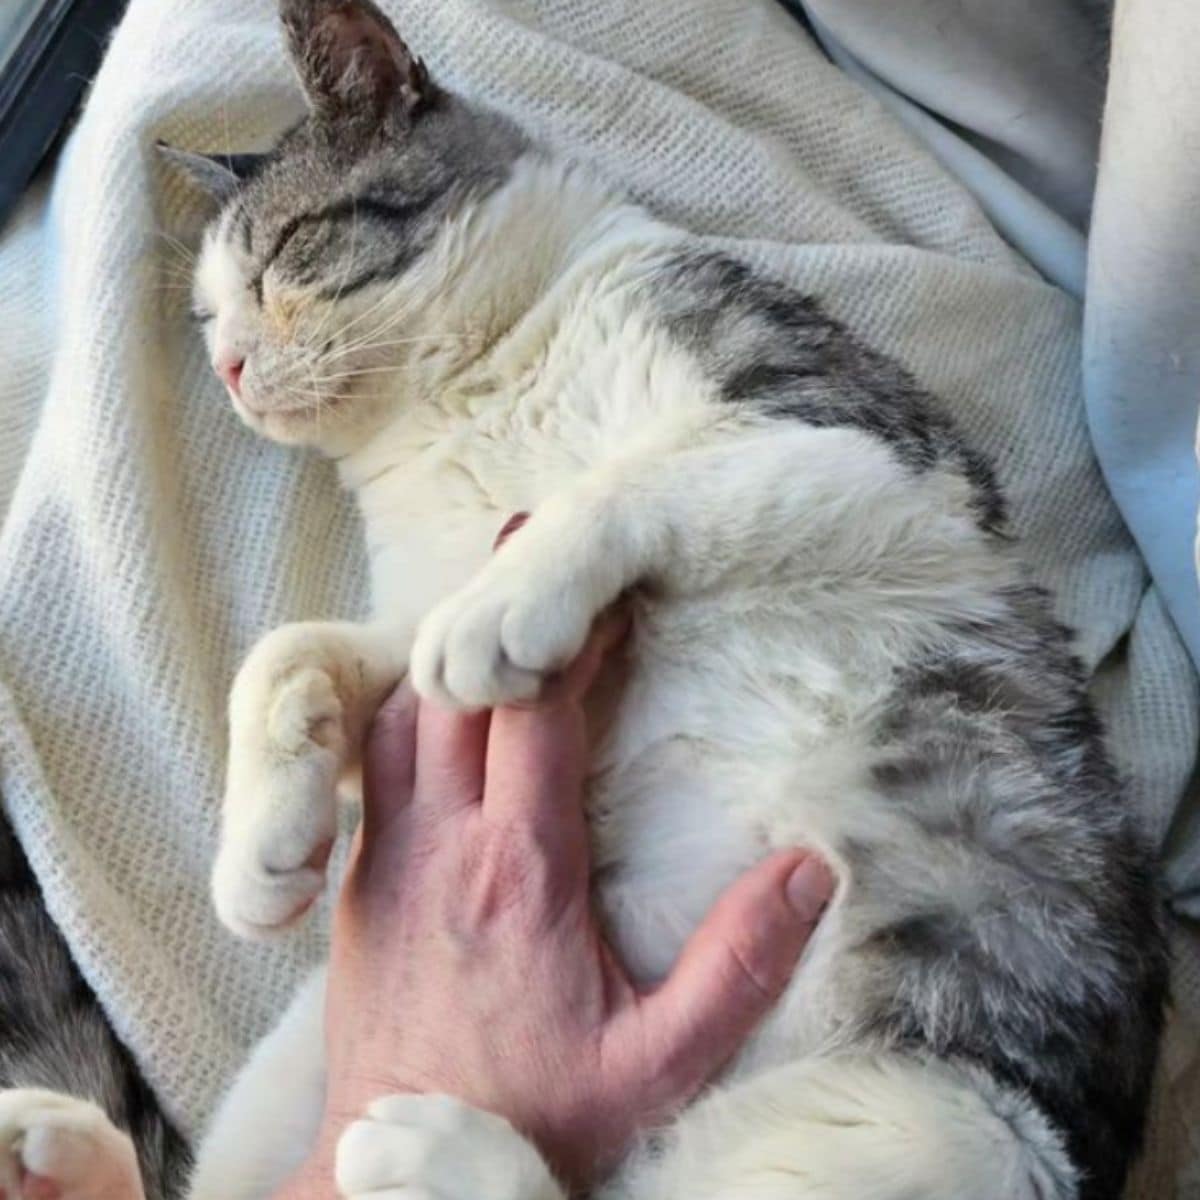 owner petting the cat